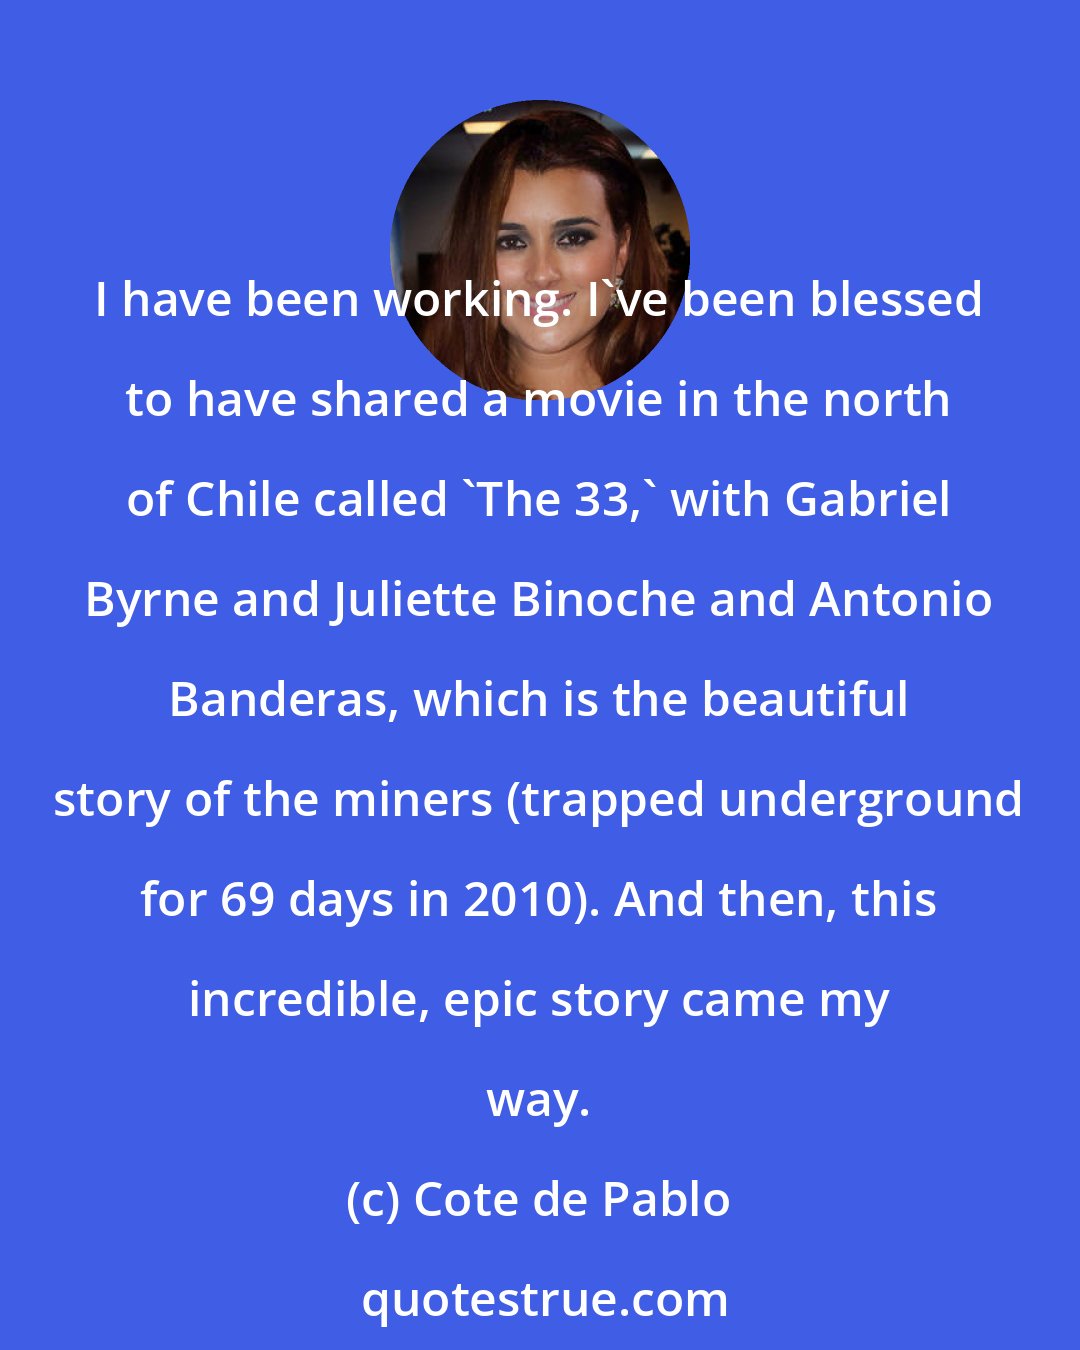 Cote de Pablo: I have been working. I've been blessed to have shared a movie in the north of Chile called 'The 33,' with Gabriel Byrne and Juliette Binoche and Antonio Banderas, which is the beautiful story of the miners (trapped underground for 69 days in 2010). And then, this incredible, epic story came my way.